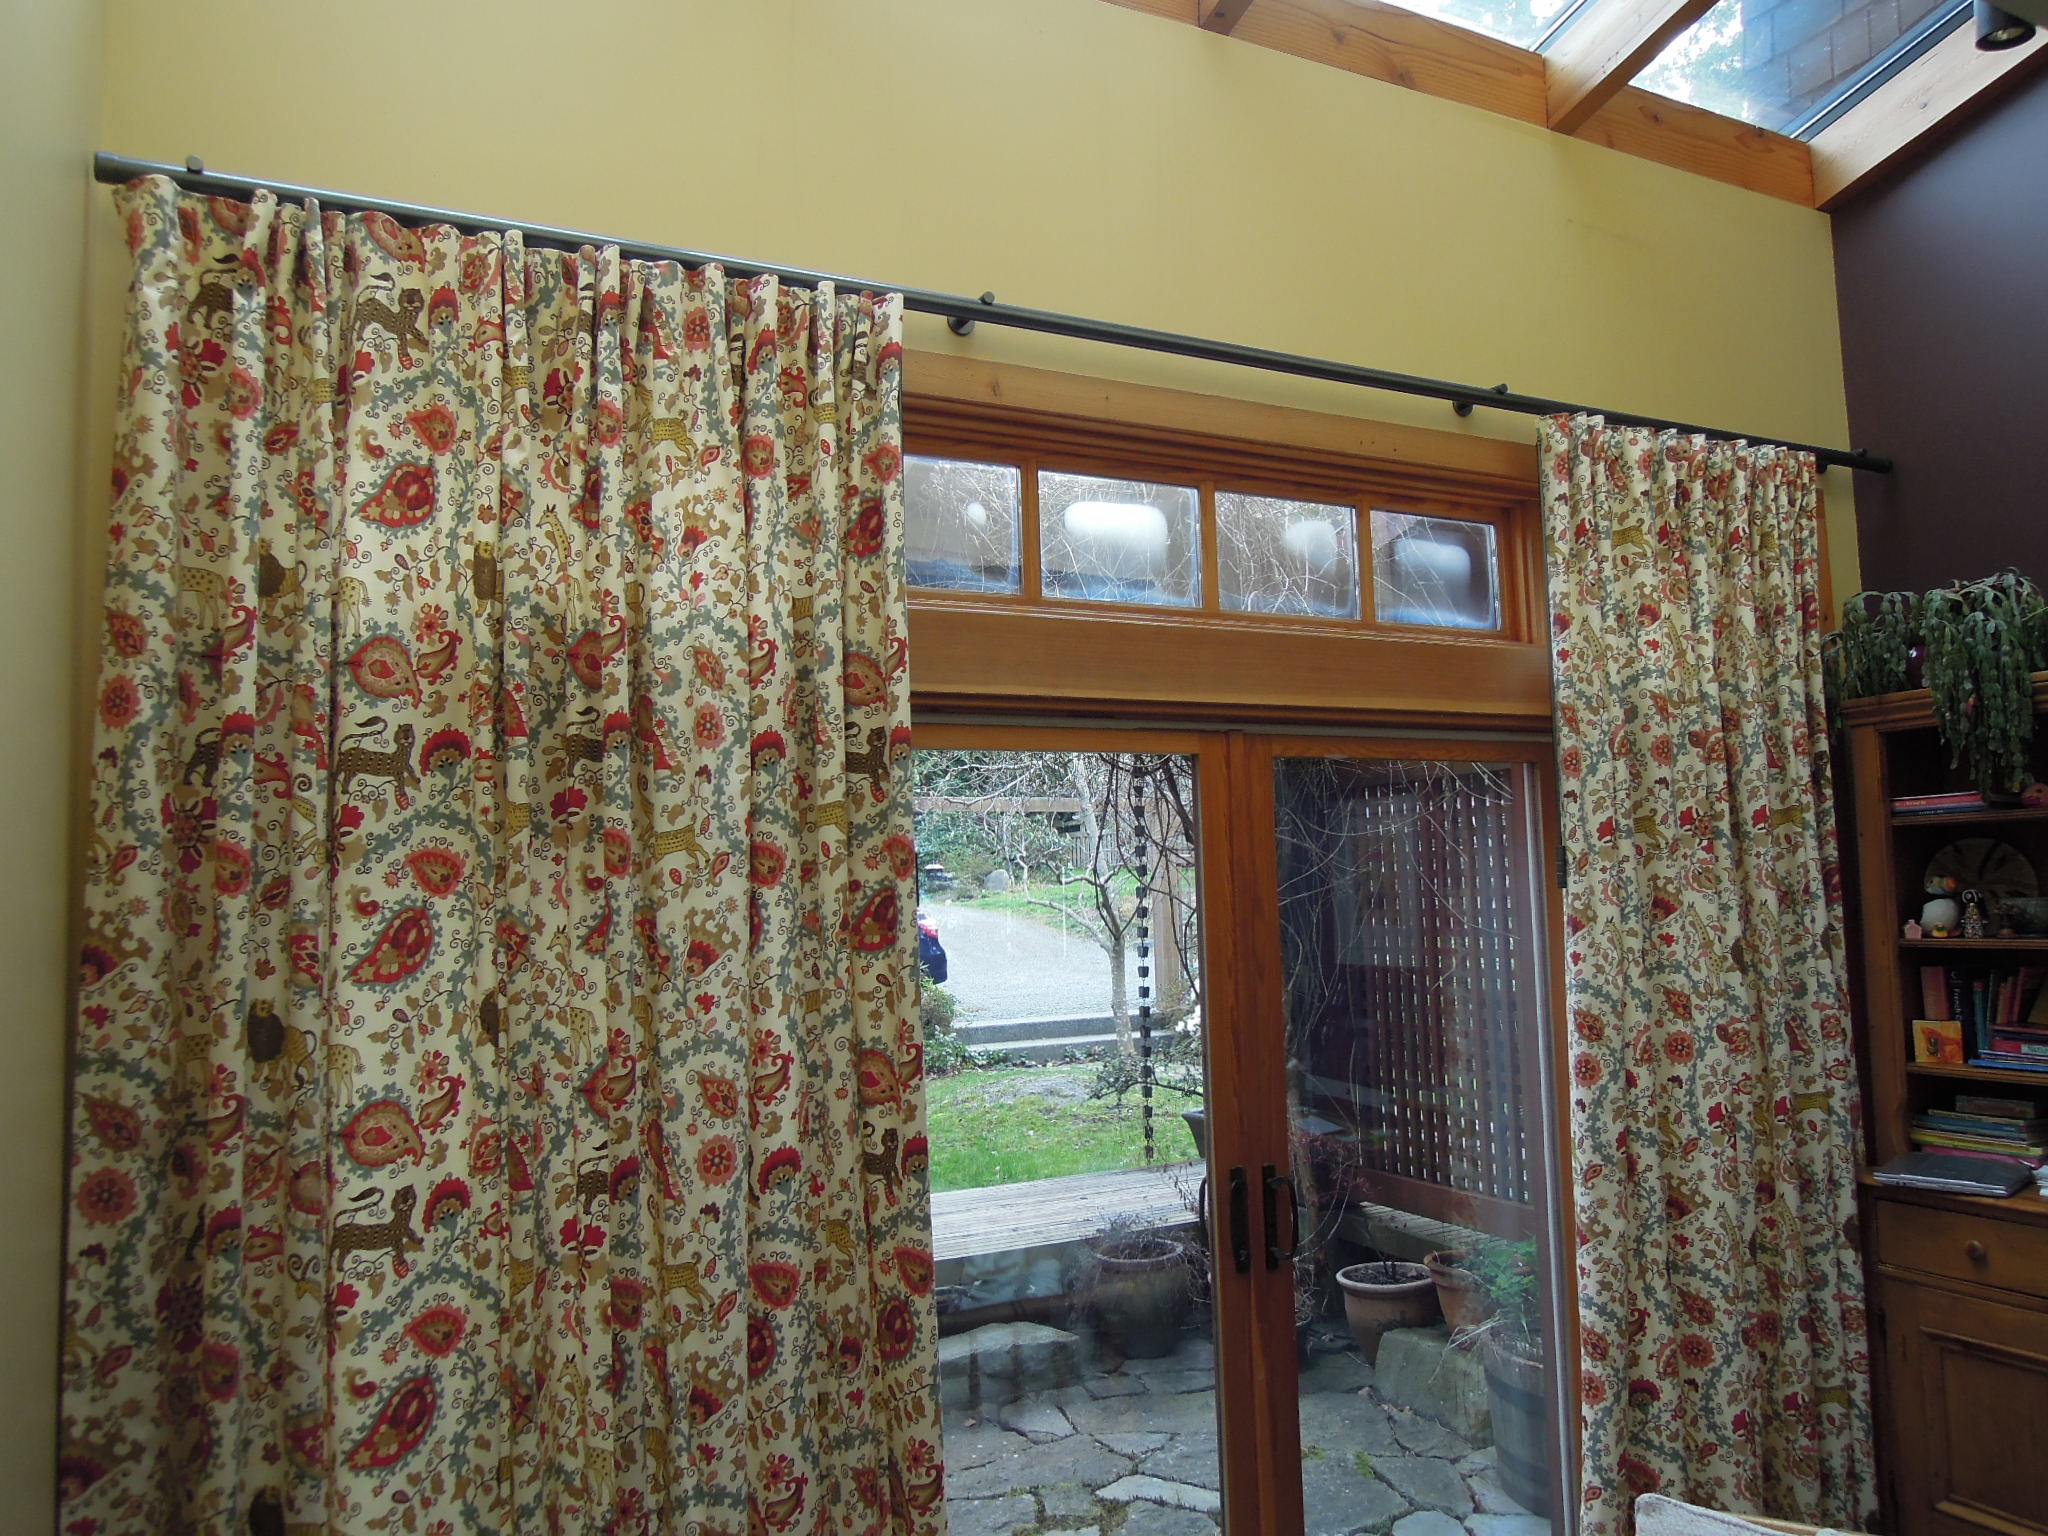 channel rod, curtains, floral curtains, draperies, large window